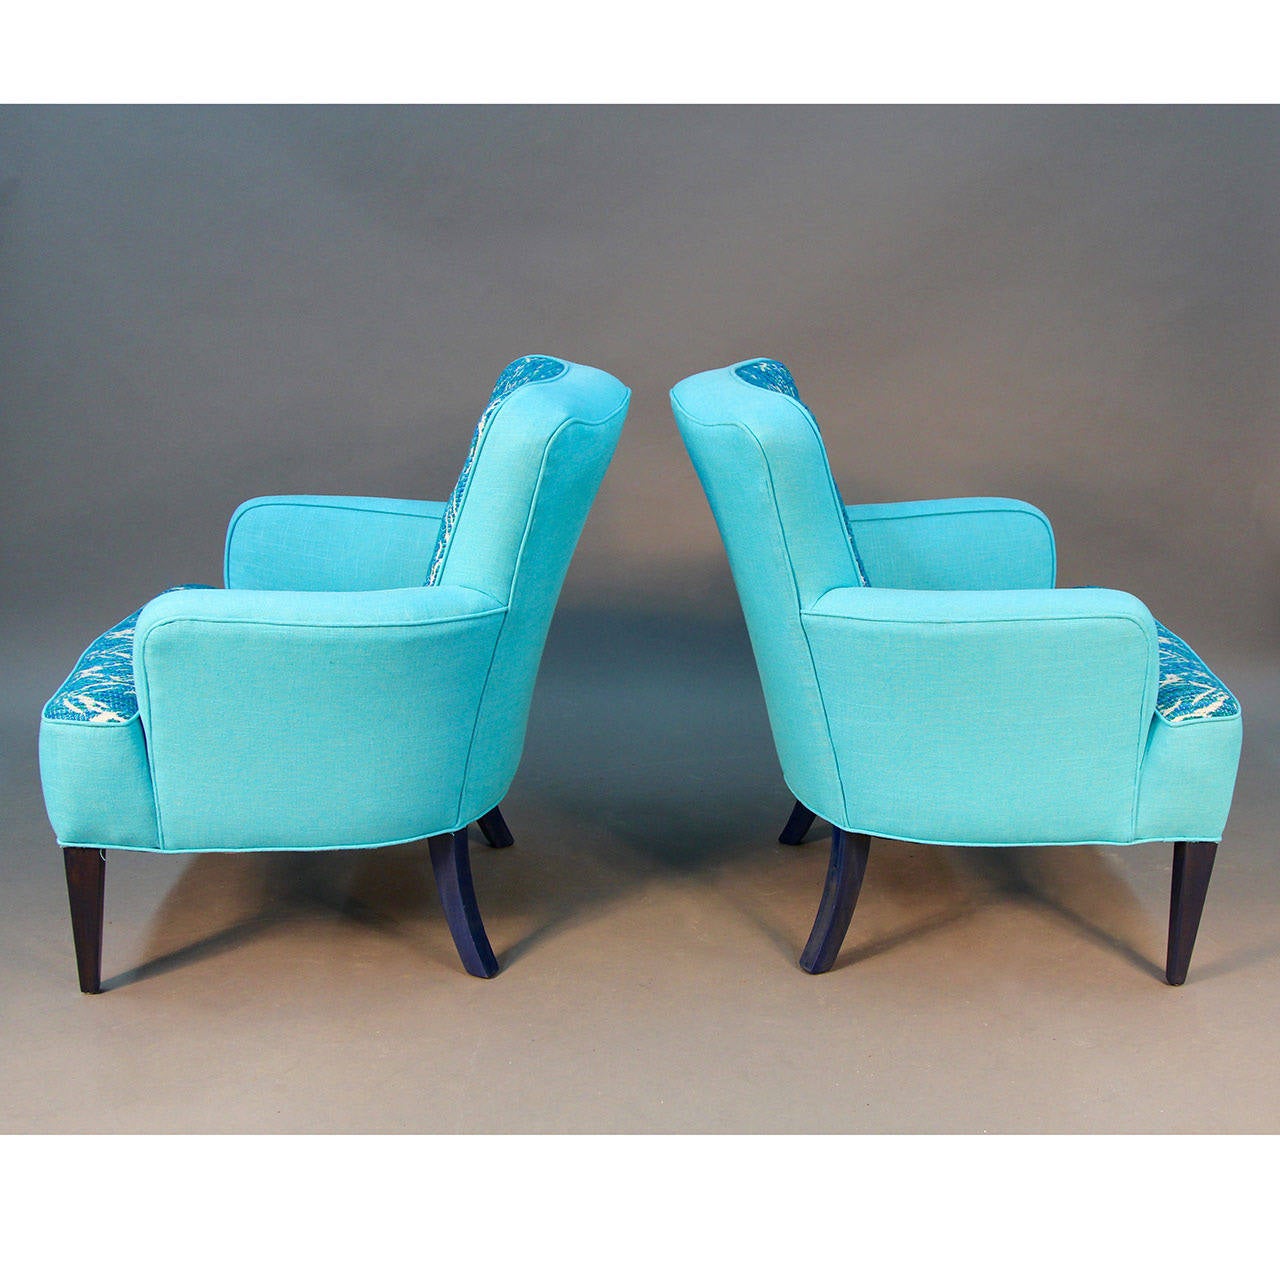 Pair of Turquoise Sala Chairs Draper Era In Excellent Condition For Sale In Bridport, CT